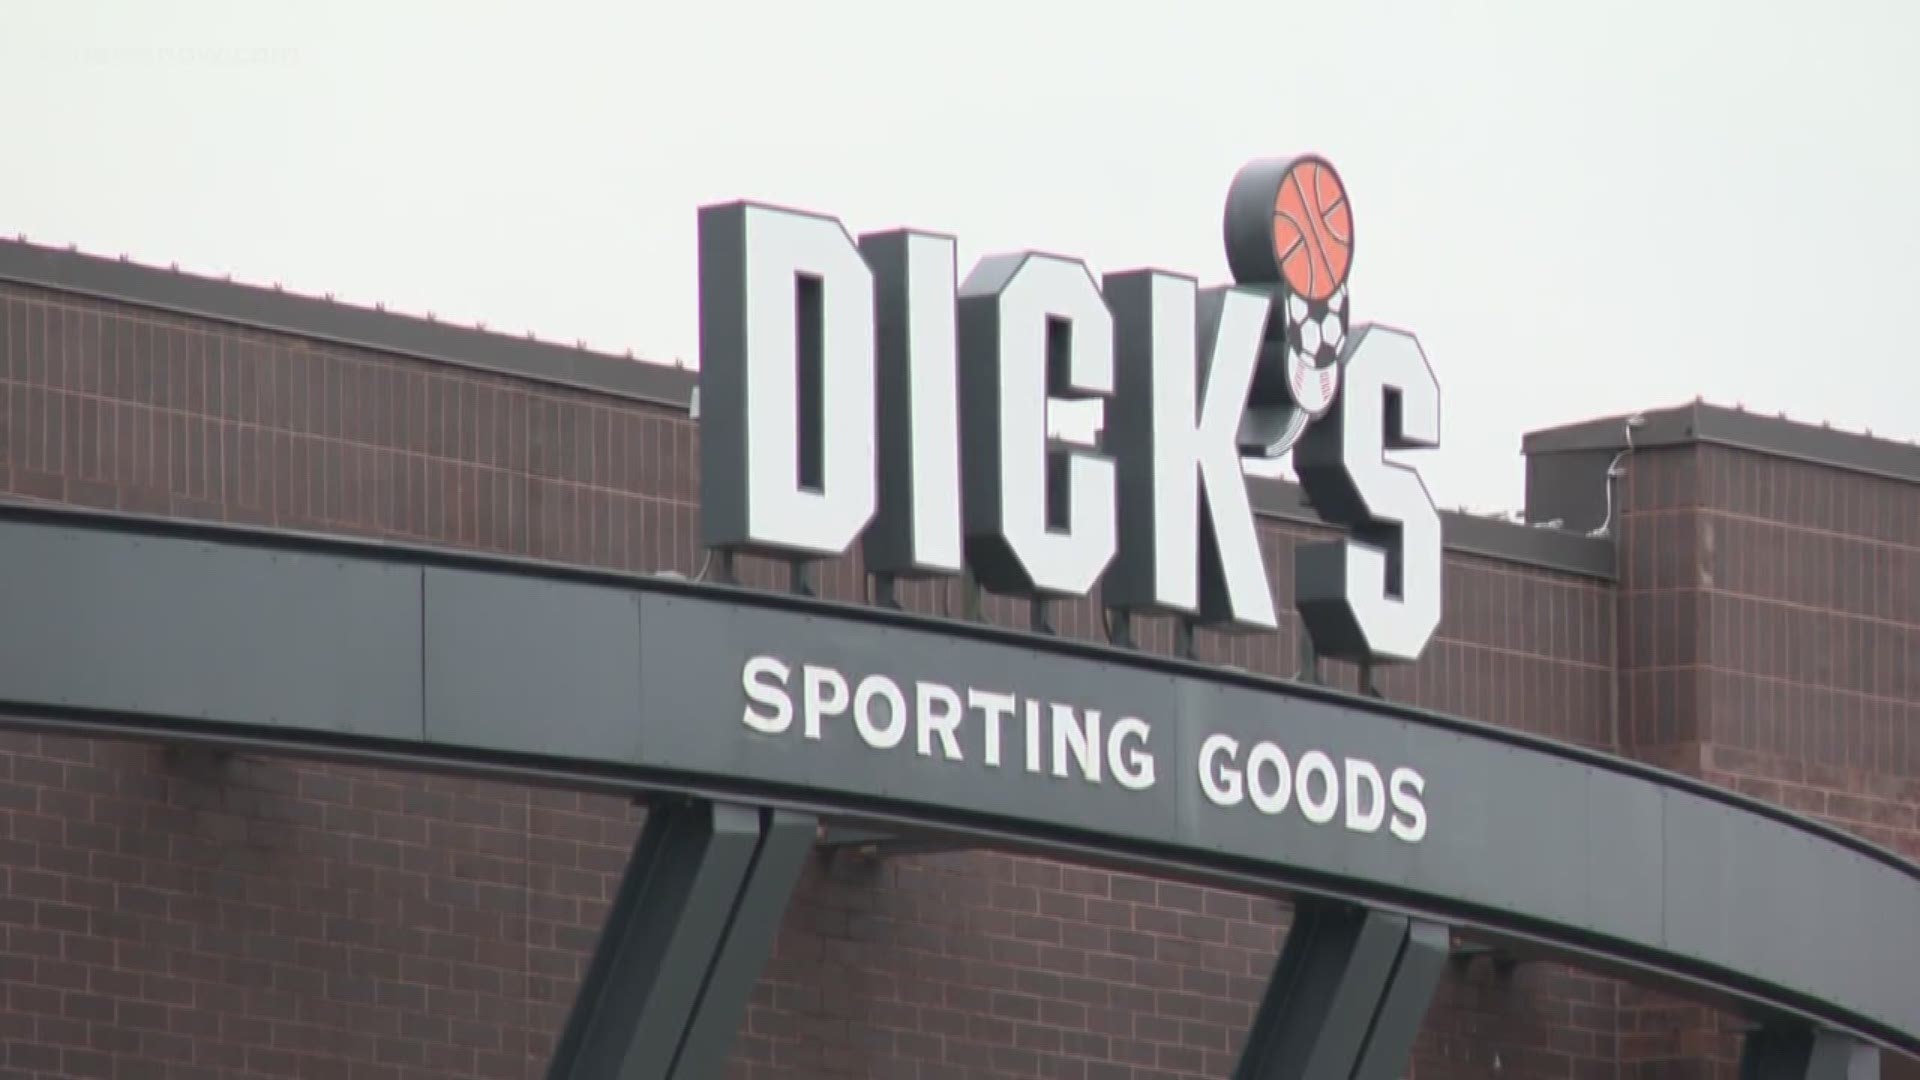 A major retailer at Virginia Beach's Town Center is closing its doors. Dick's Sporting Goods is moving out.